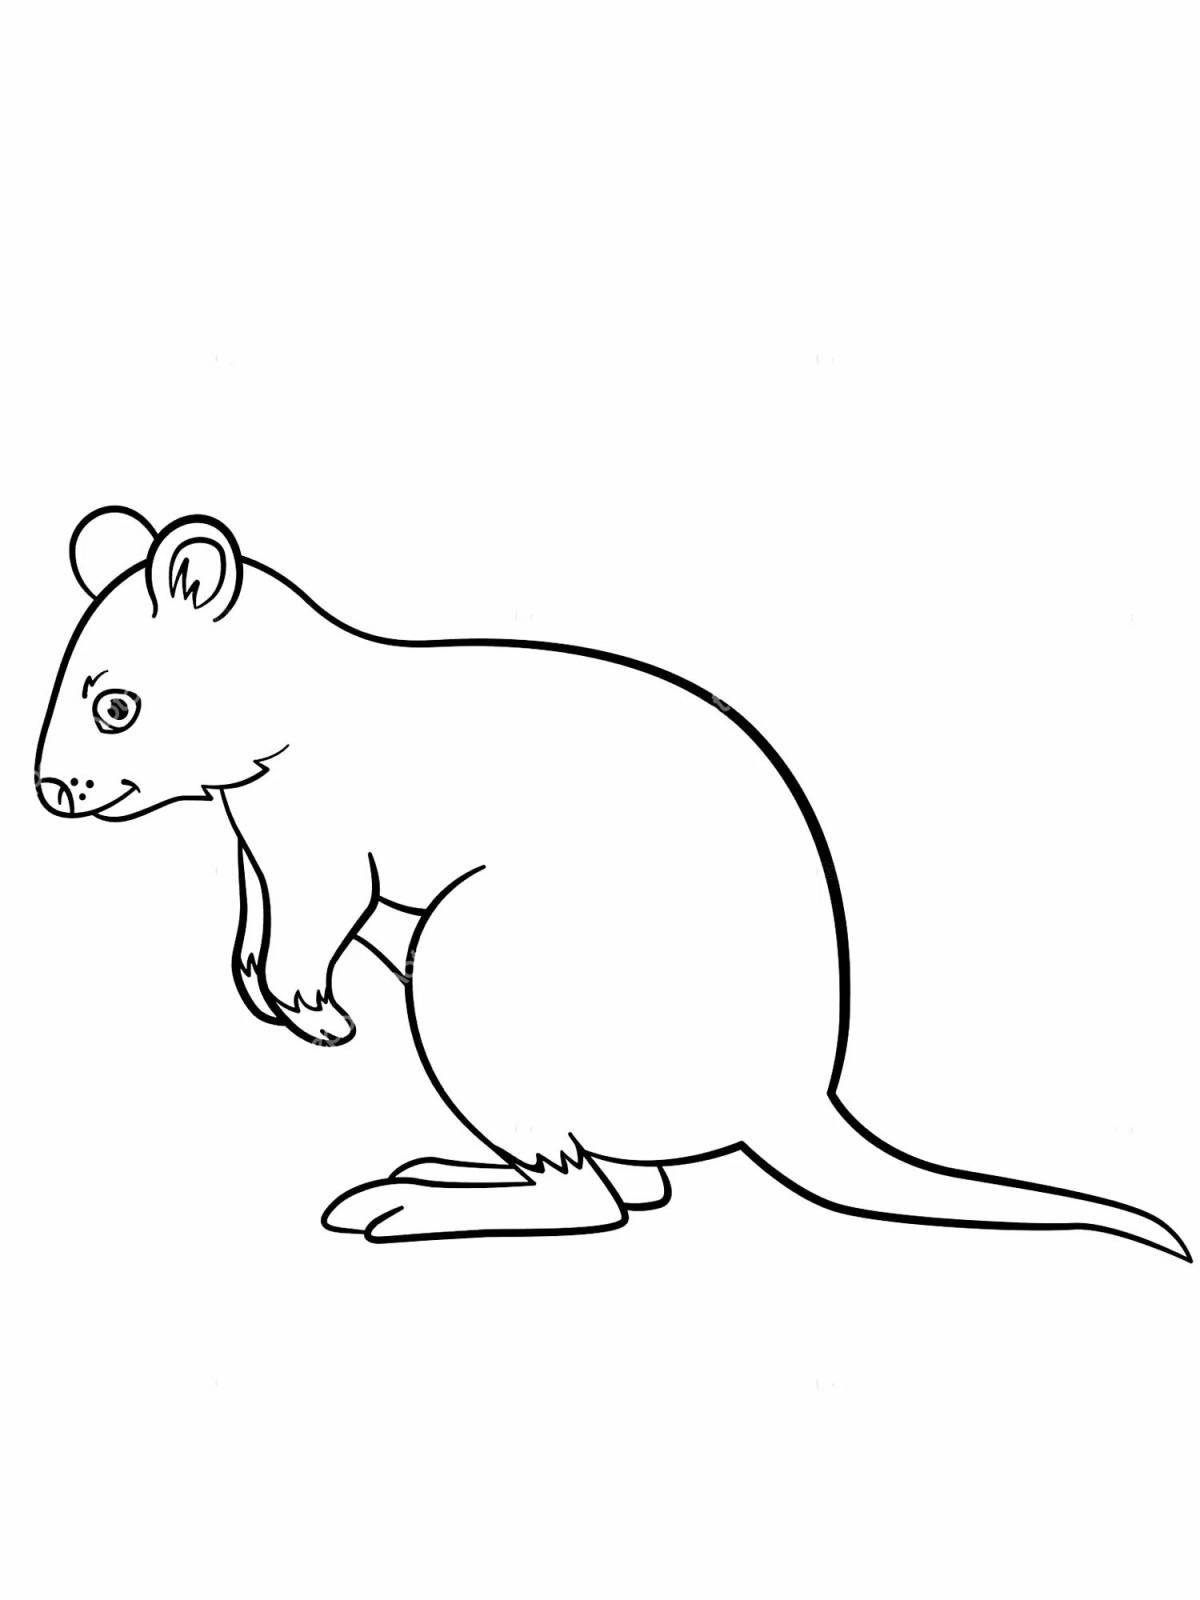 Colorful quokka coloring page